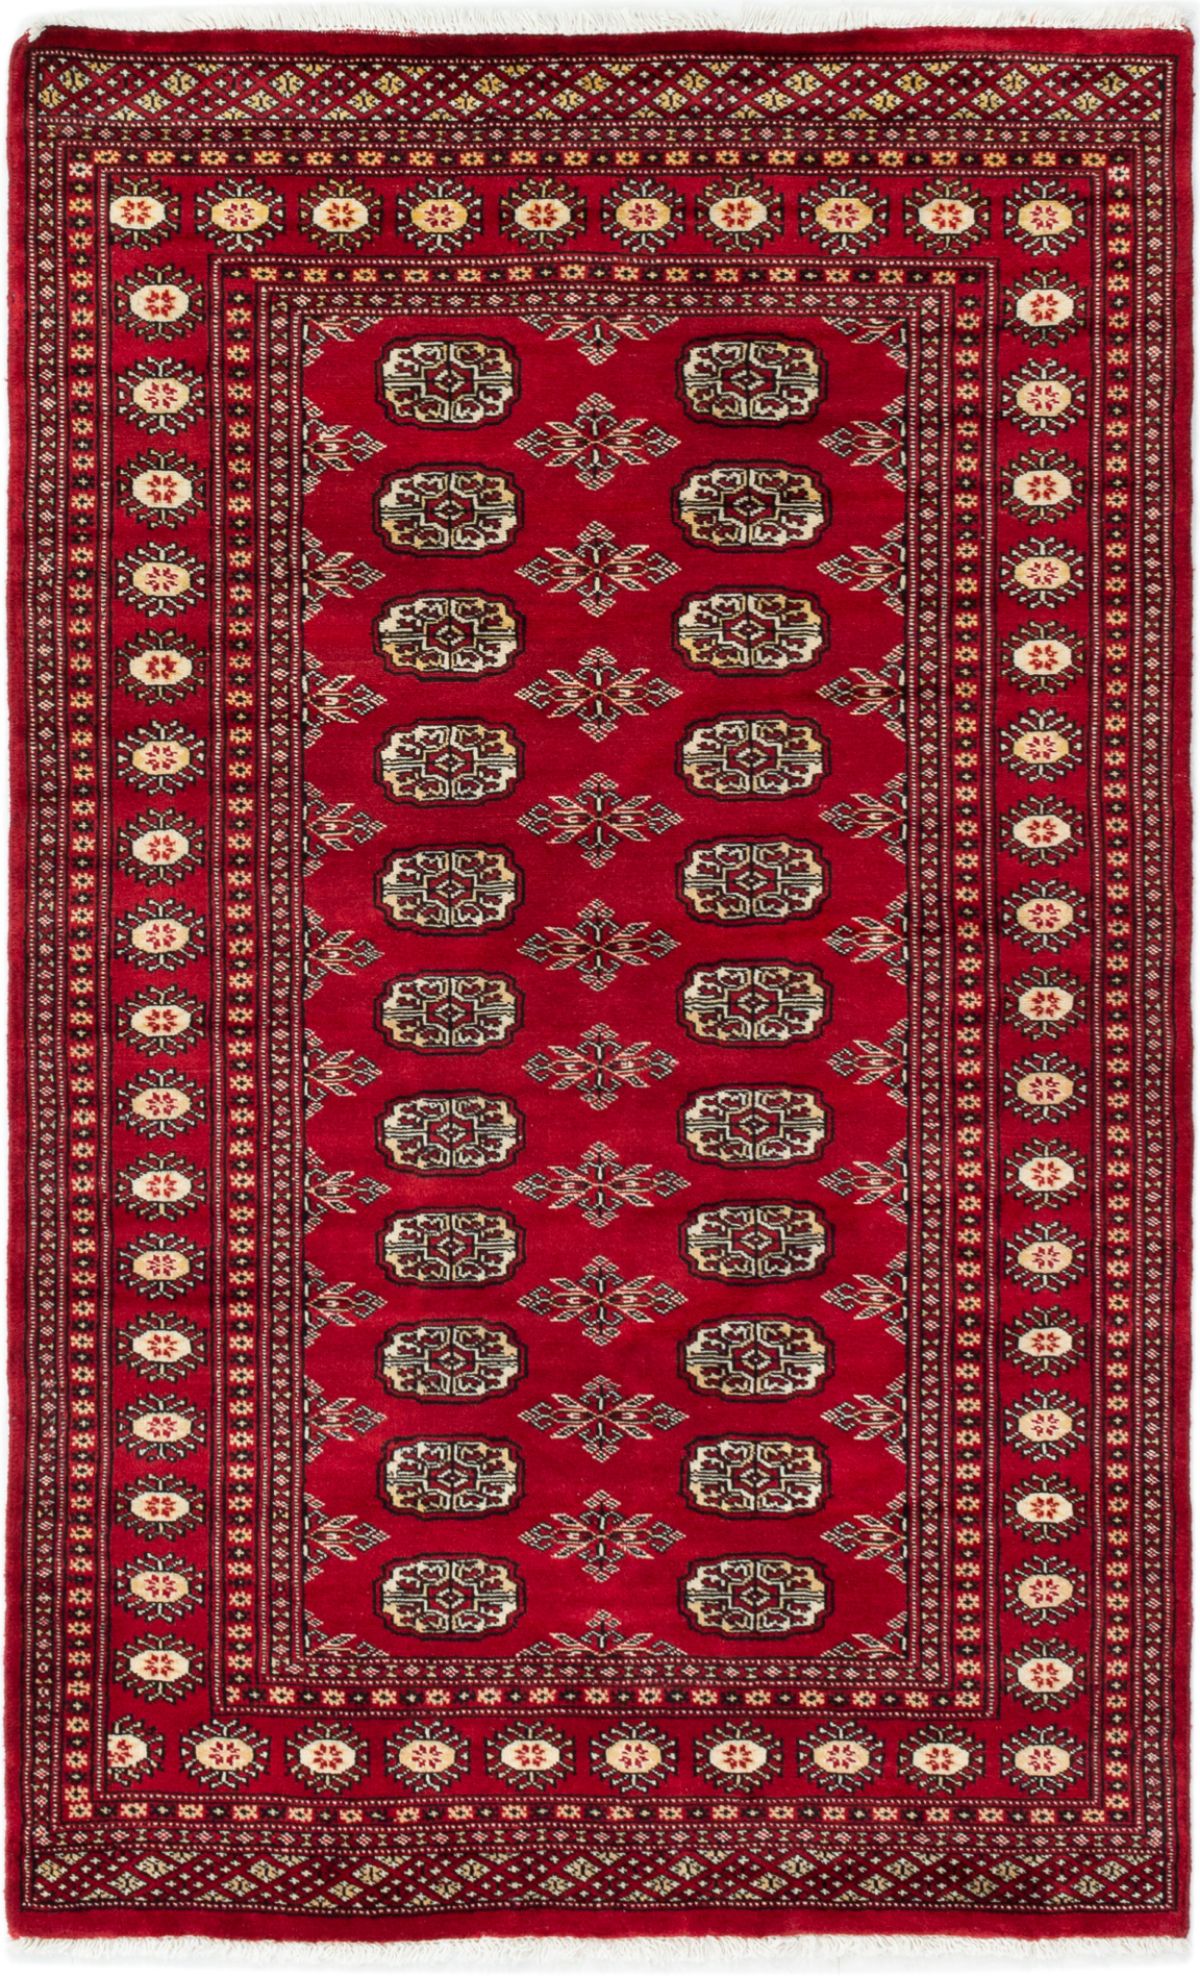 Hand-knotted Finest Peshawar Bokhara Red Wool Rug 3'10" x 6'4" Size: 3'10" x 6'4"  